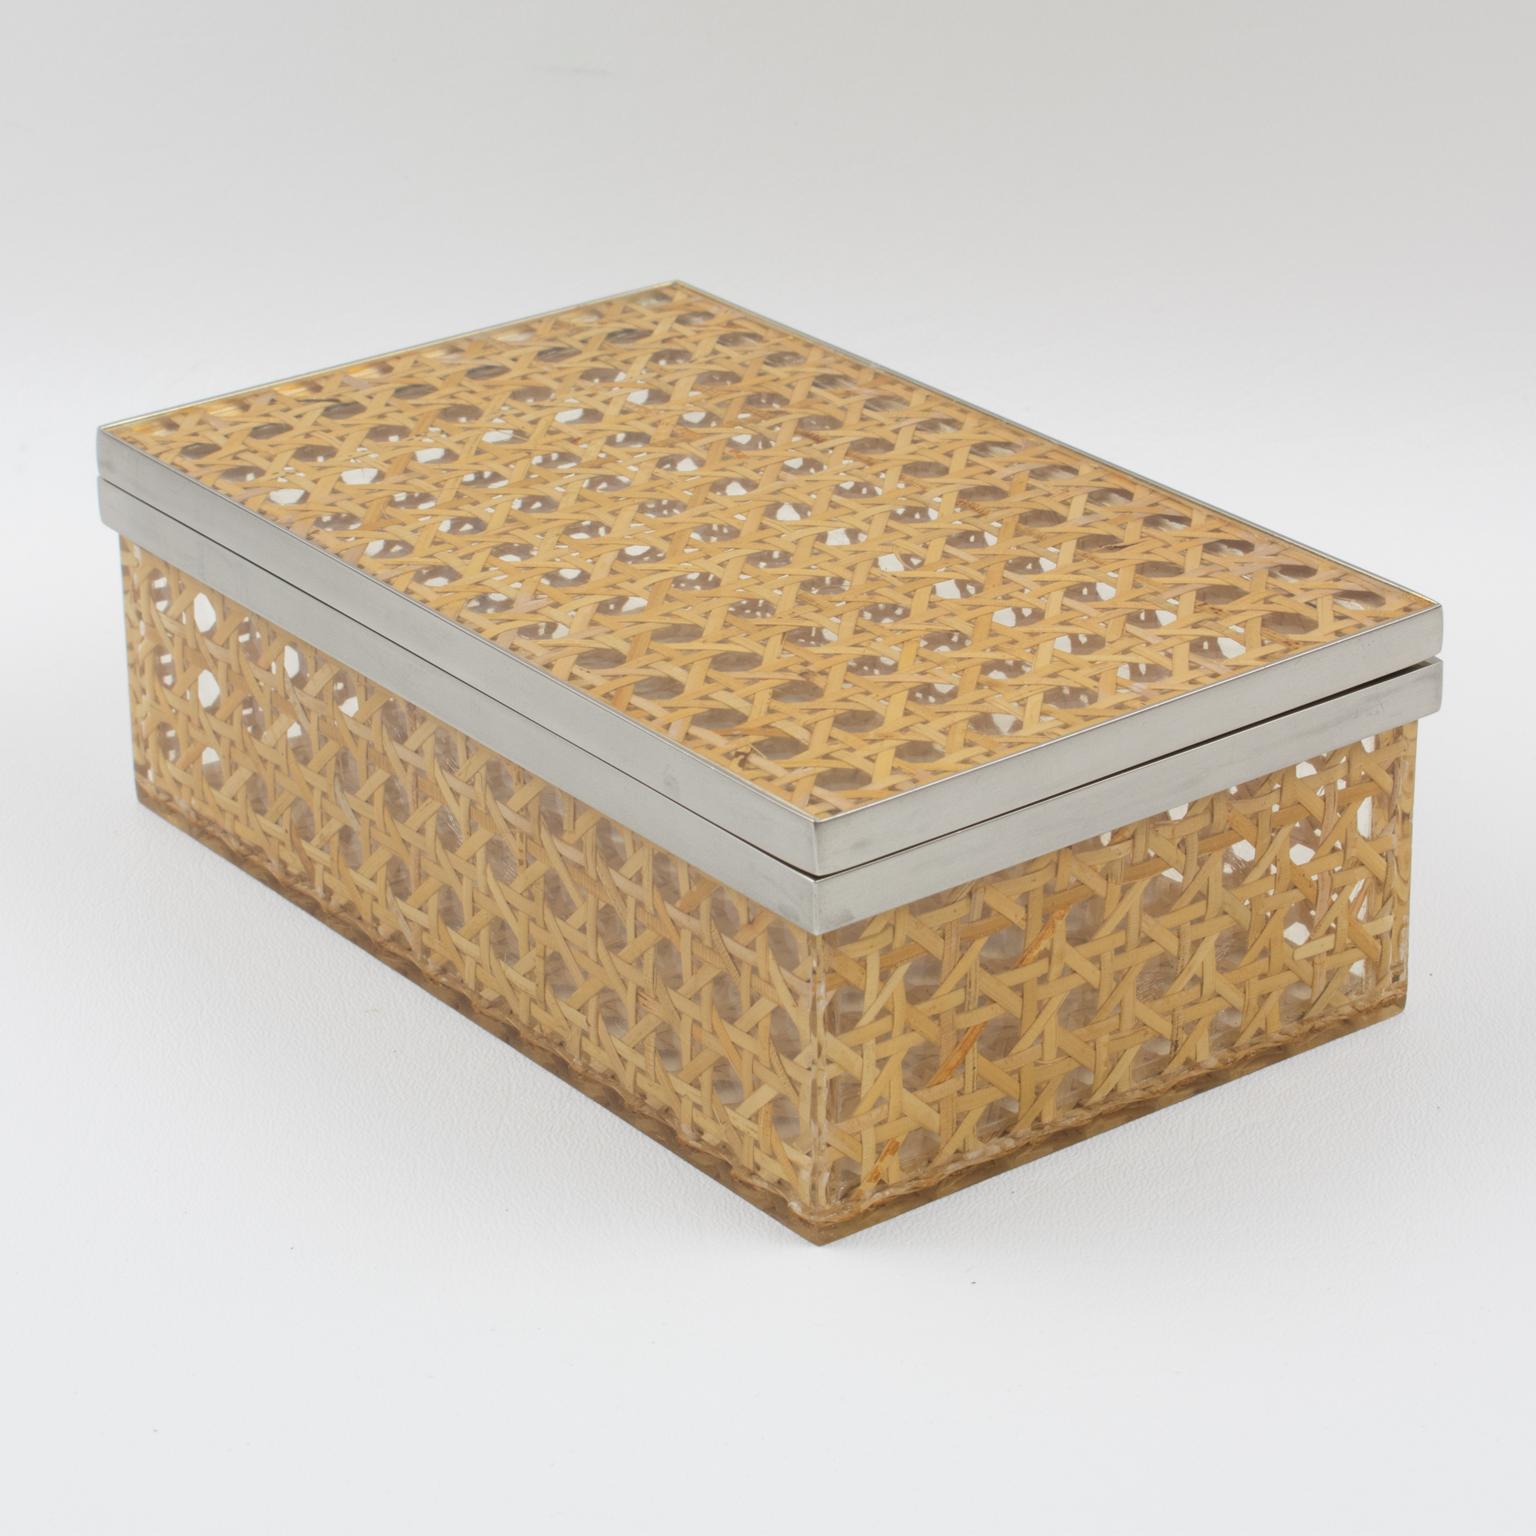 A charming modernist 1970s Lucite decorative box designed for Christian Dior Home Collection. Large rectangular shape with real rattan (or wicker) cane work embedded in the crystal clear Lucite and chromed metal hardware. Great accessory for any